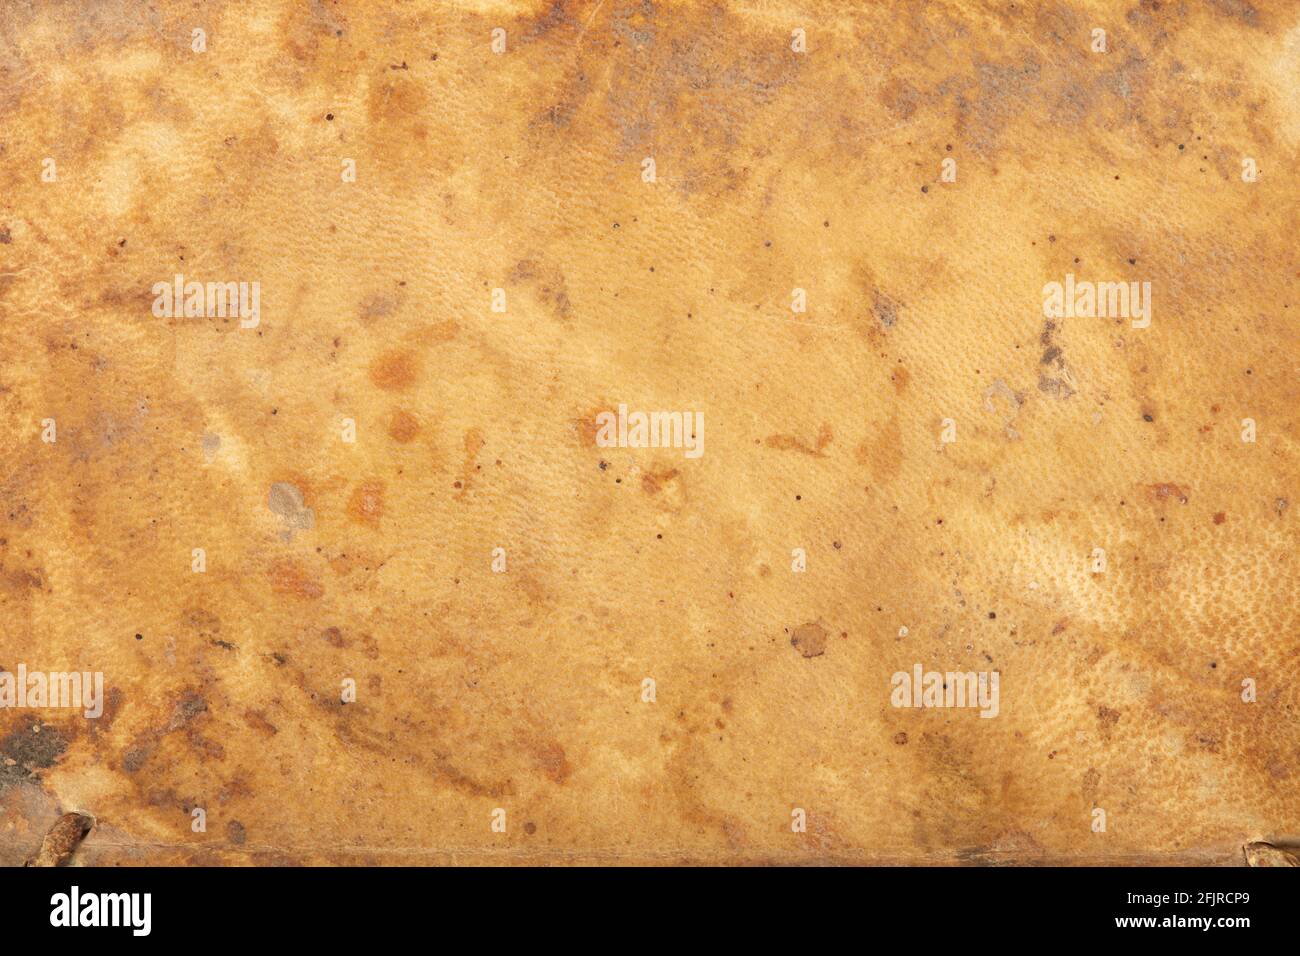 https://c8.alamy.com/comp/2FJRCP9/old-stained-leather-parchment-texture-background-2FJRCP9.jpg